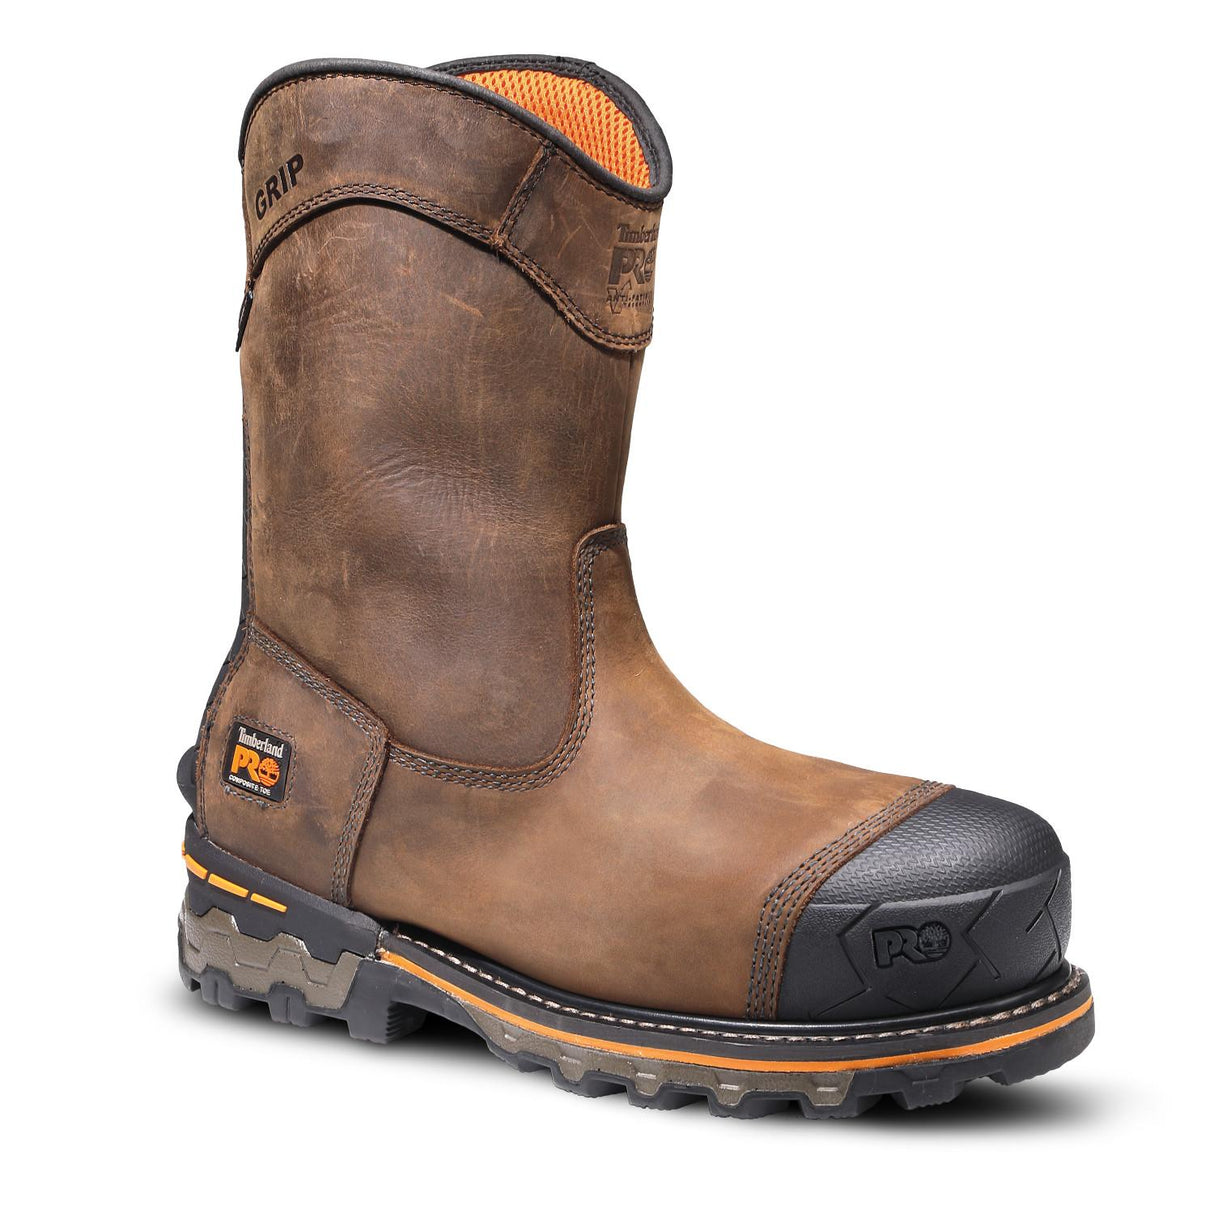 Timberland Pro-Boondock Pullon Composite-Toe Waterproof Fp Ins Csa 200G Brown-Steel Toes-5